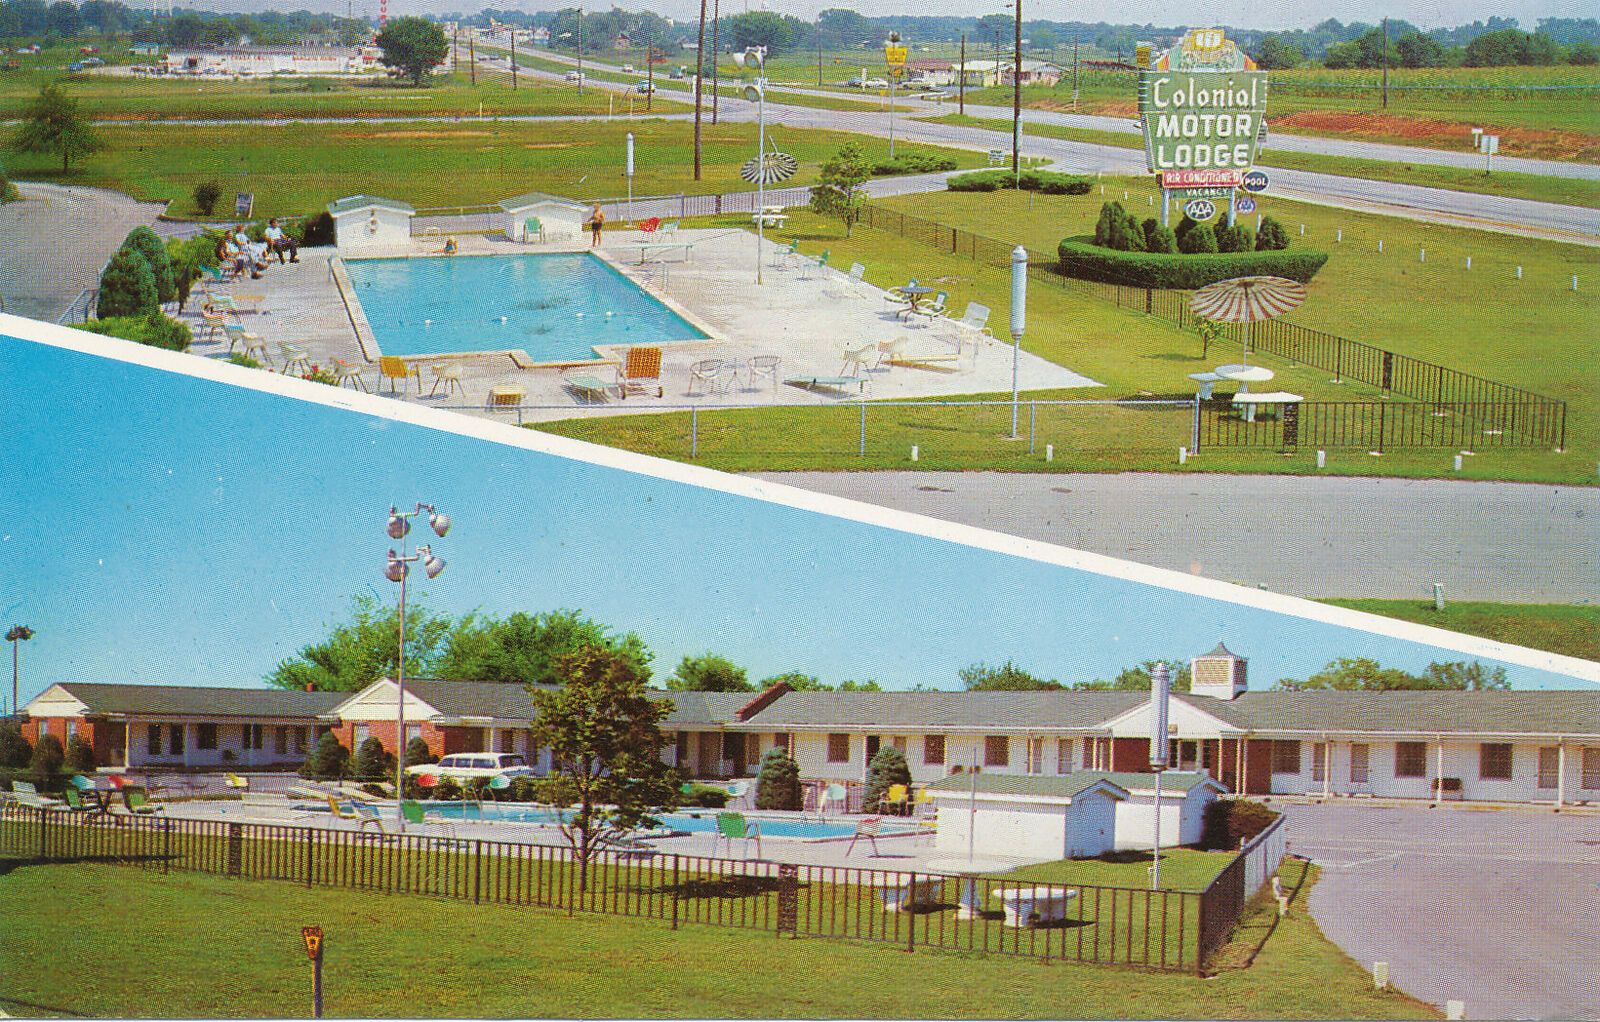 Colonial Motor Lodge Diner House Springfield Missouri posted 1965 Postcard